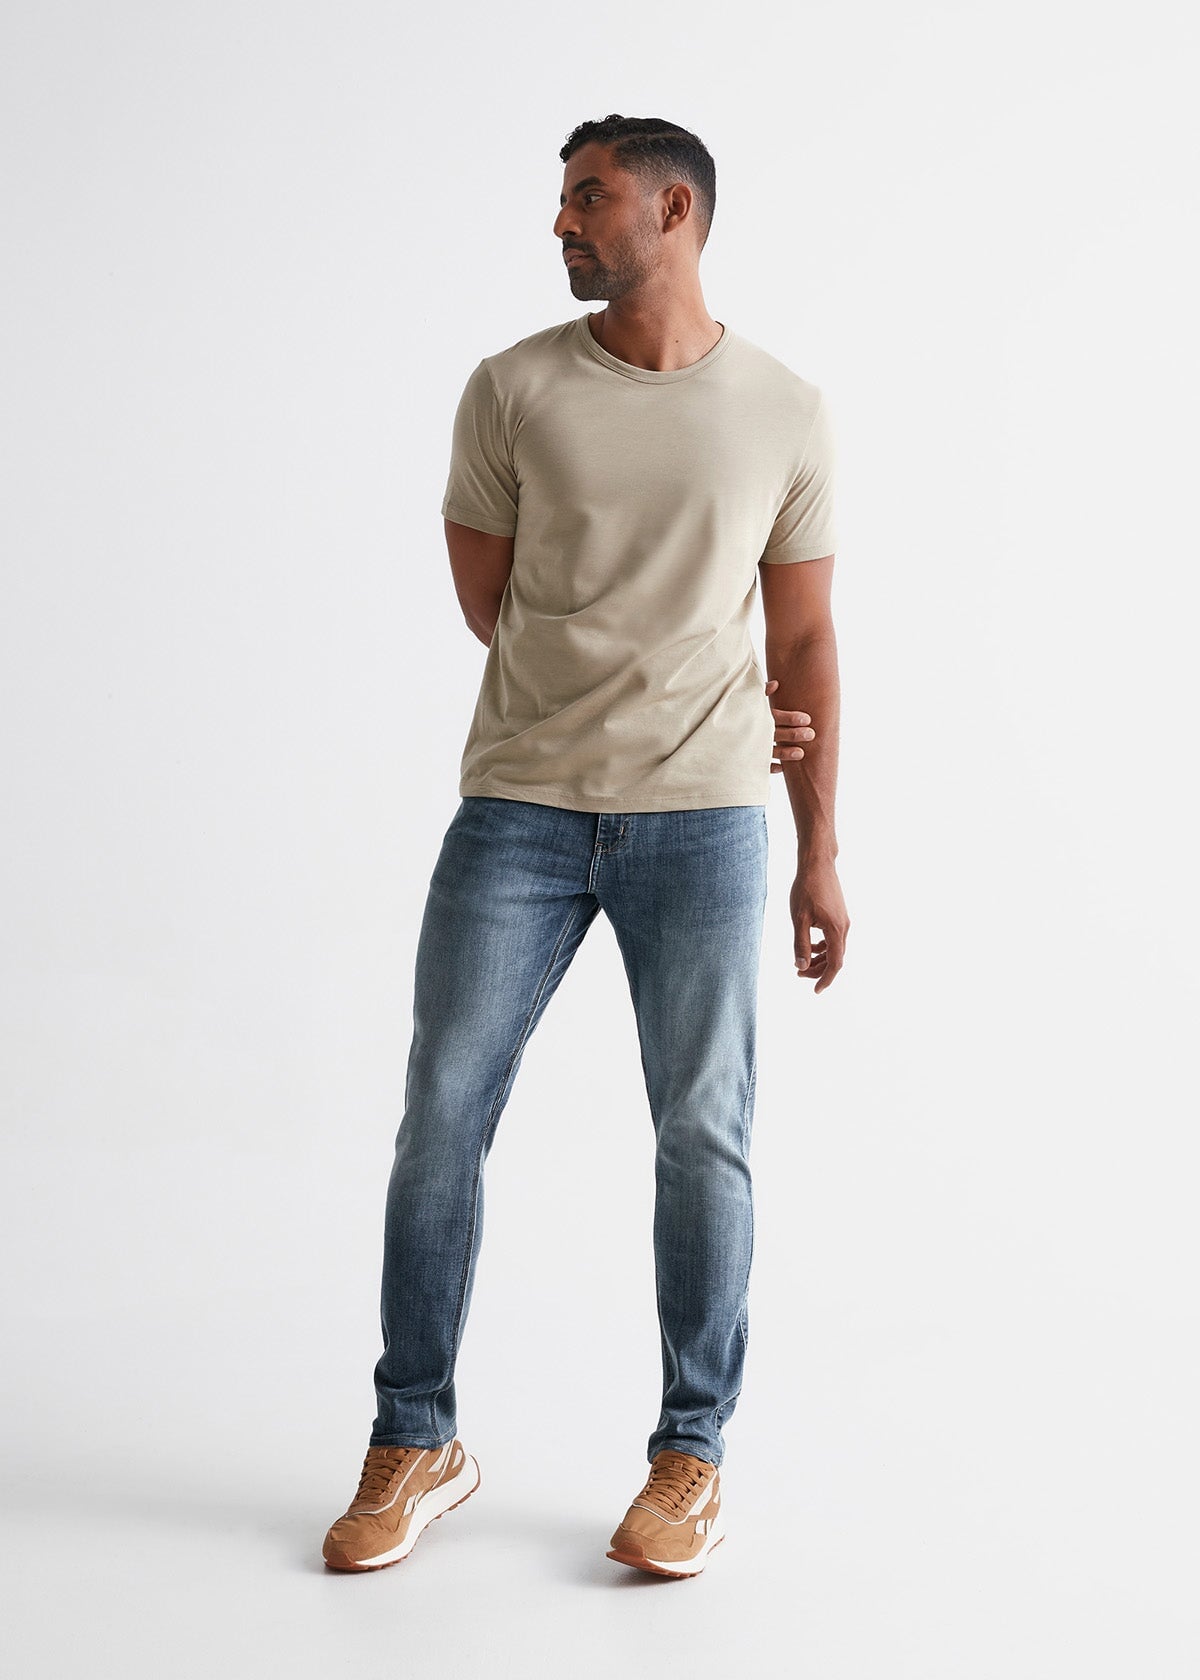 How to Wear Faded Denim - Pale Jeans Guide